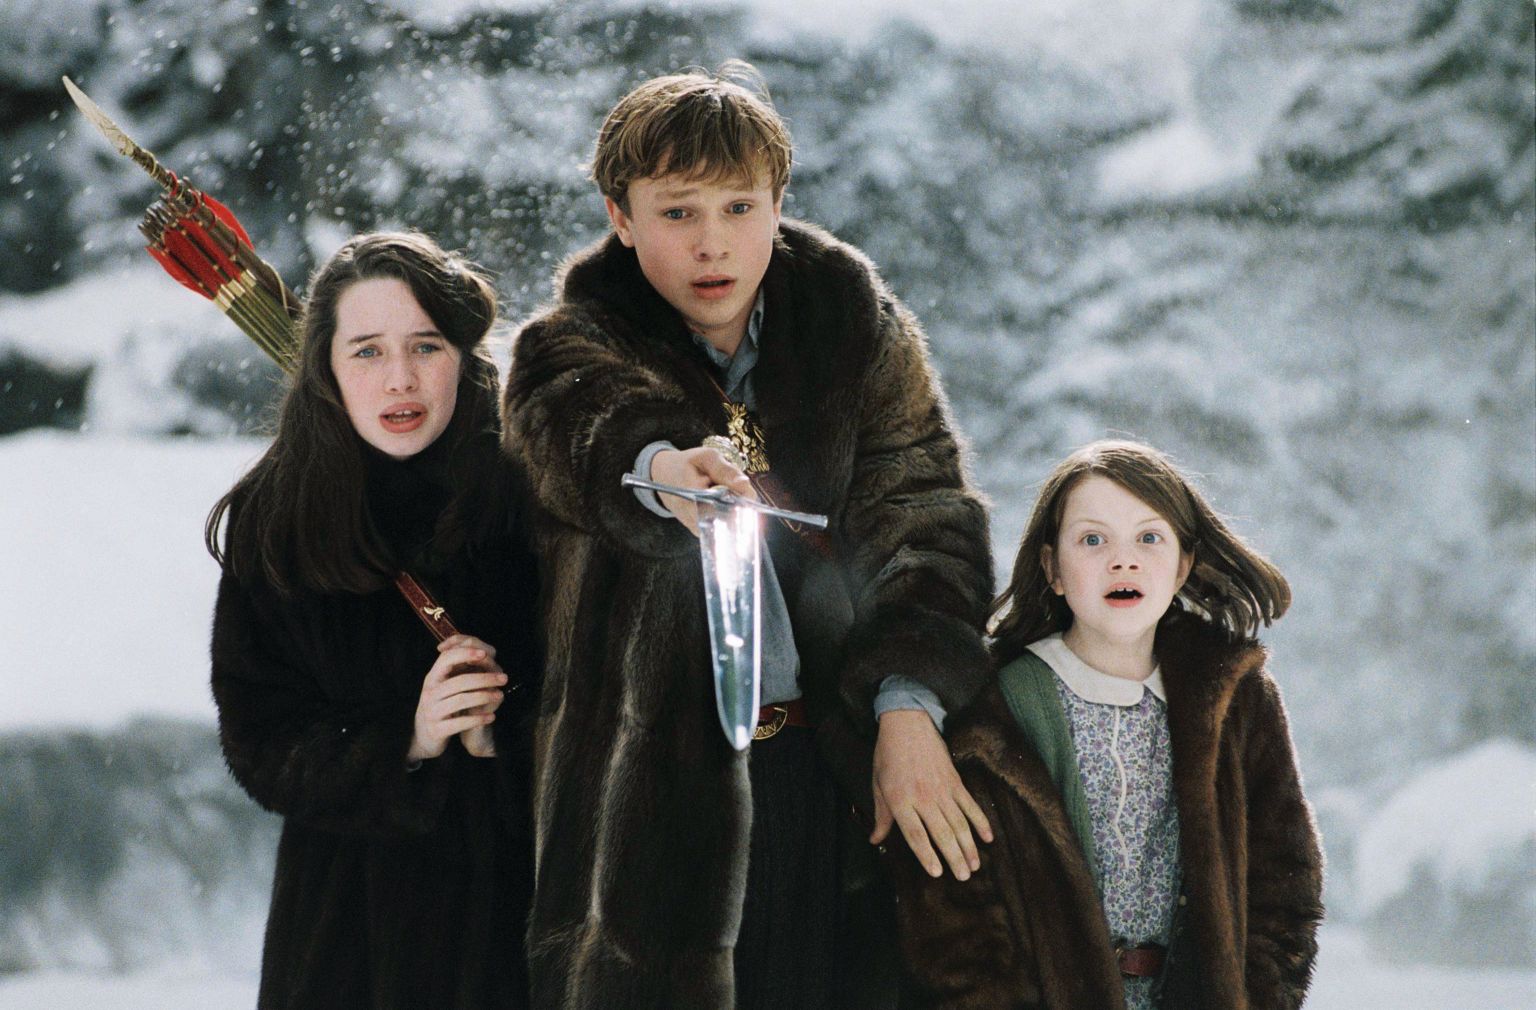 The Lion, the Witch and the Wardrobe Hi-Res Narnia Images from Disney - Narnia Fans1536 x 1010